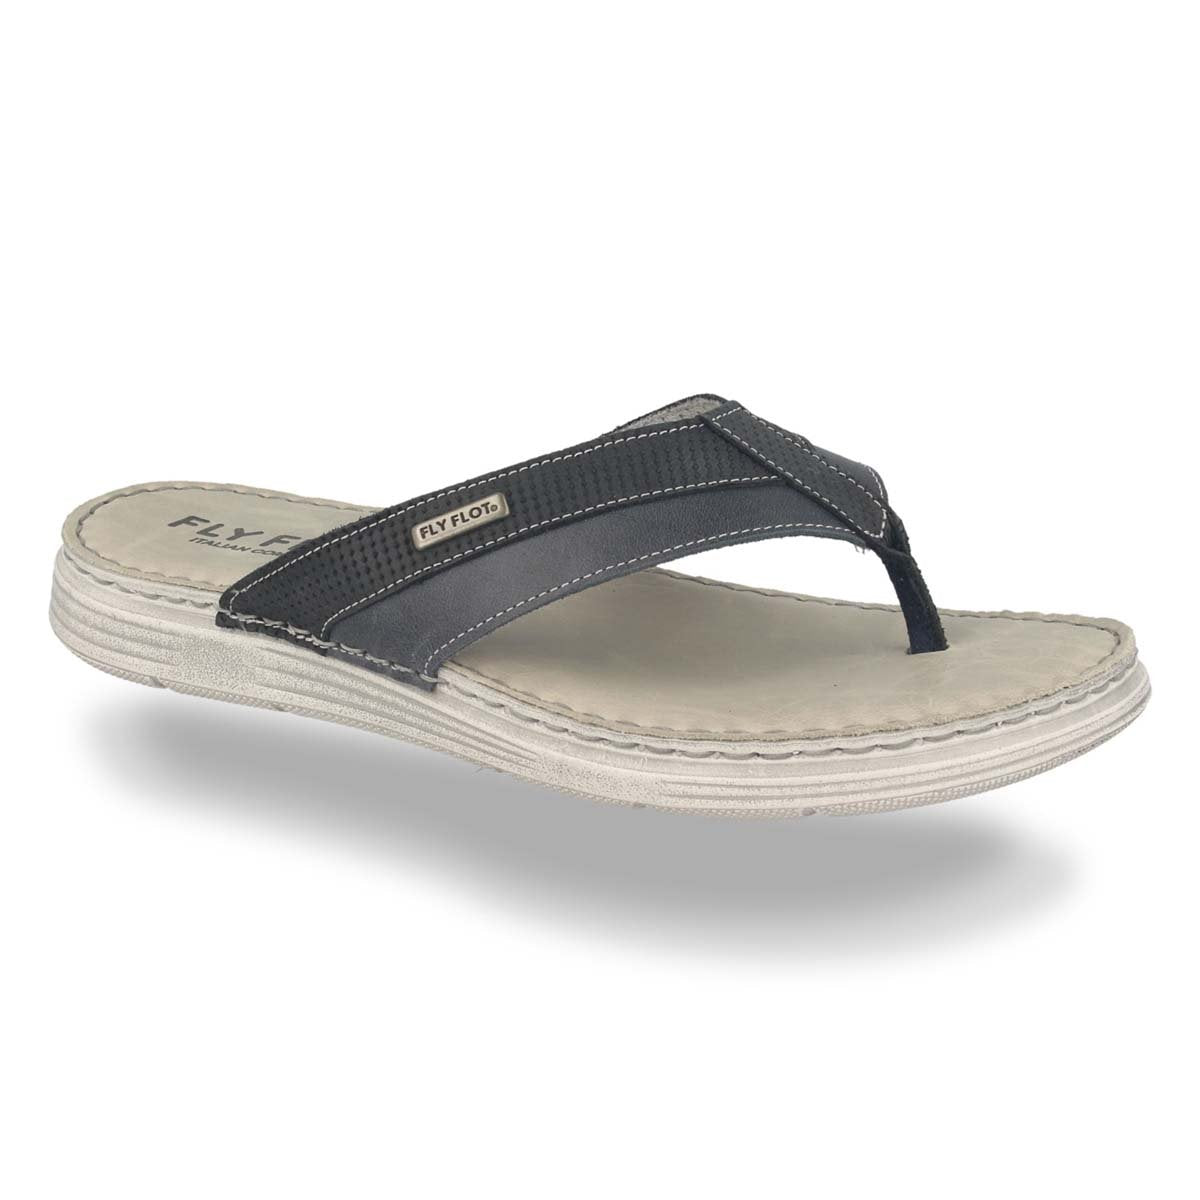 See the Trendy Leather Open Toe Flip Flops Men Sandals in the colour BLACK, available in various sizes